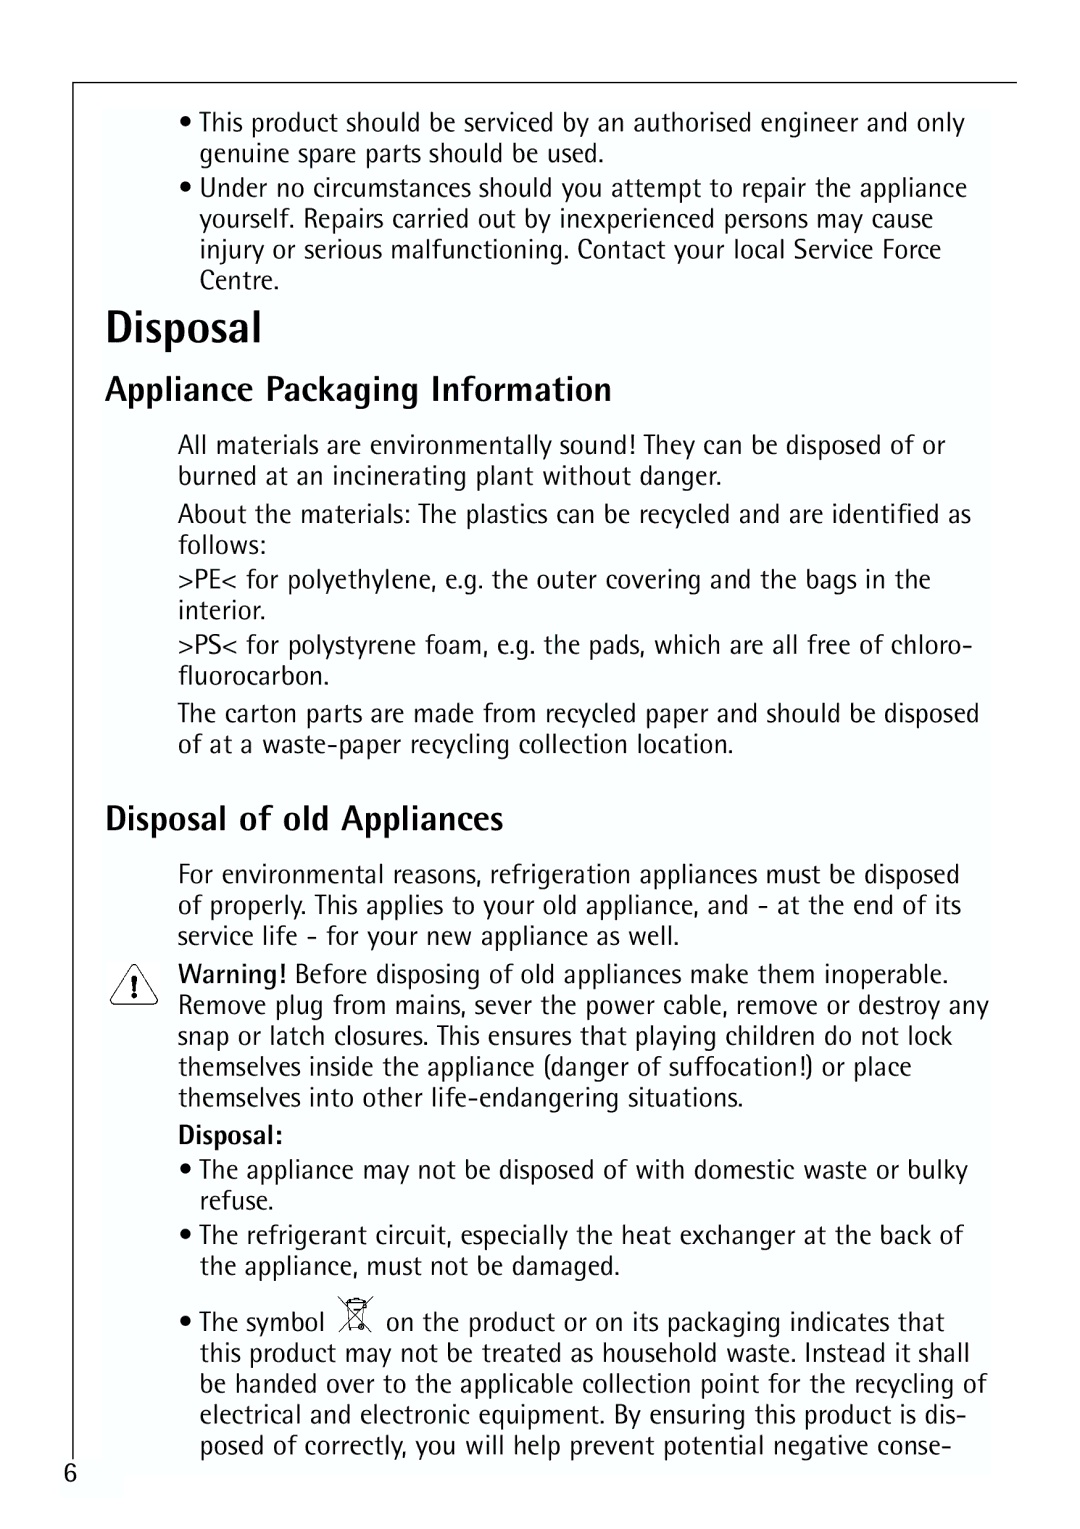 Electrolux ARCTIS 70110 manual Appliance Packaging Information, Disposal of old Appliances 